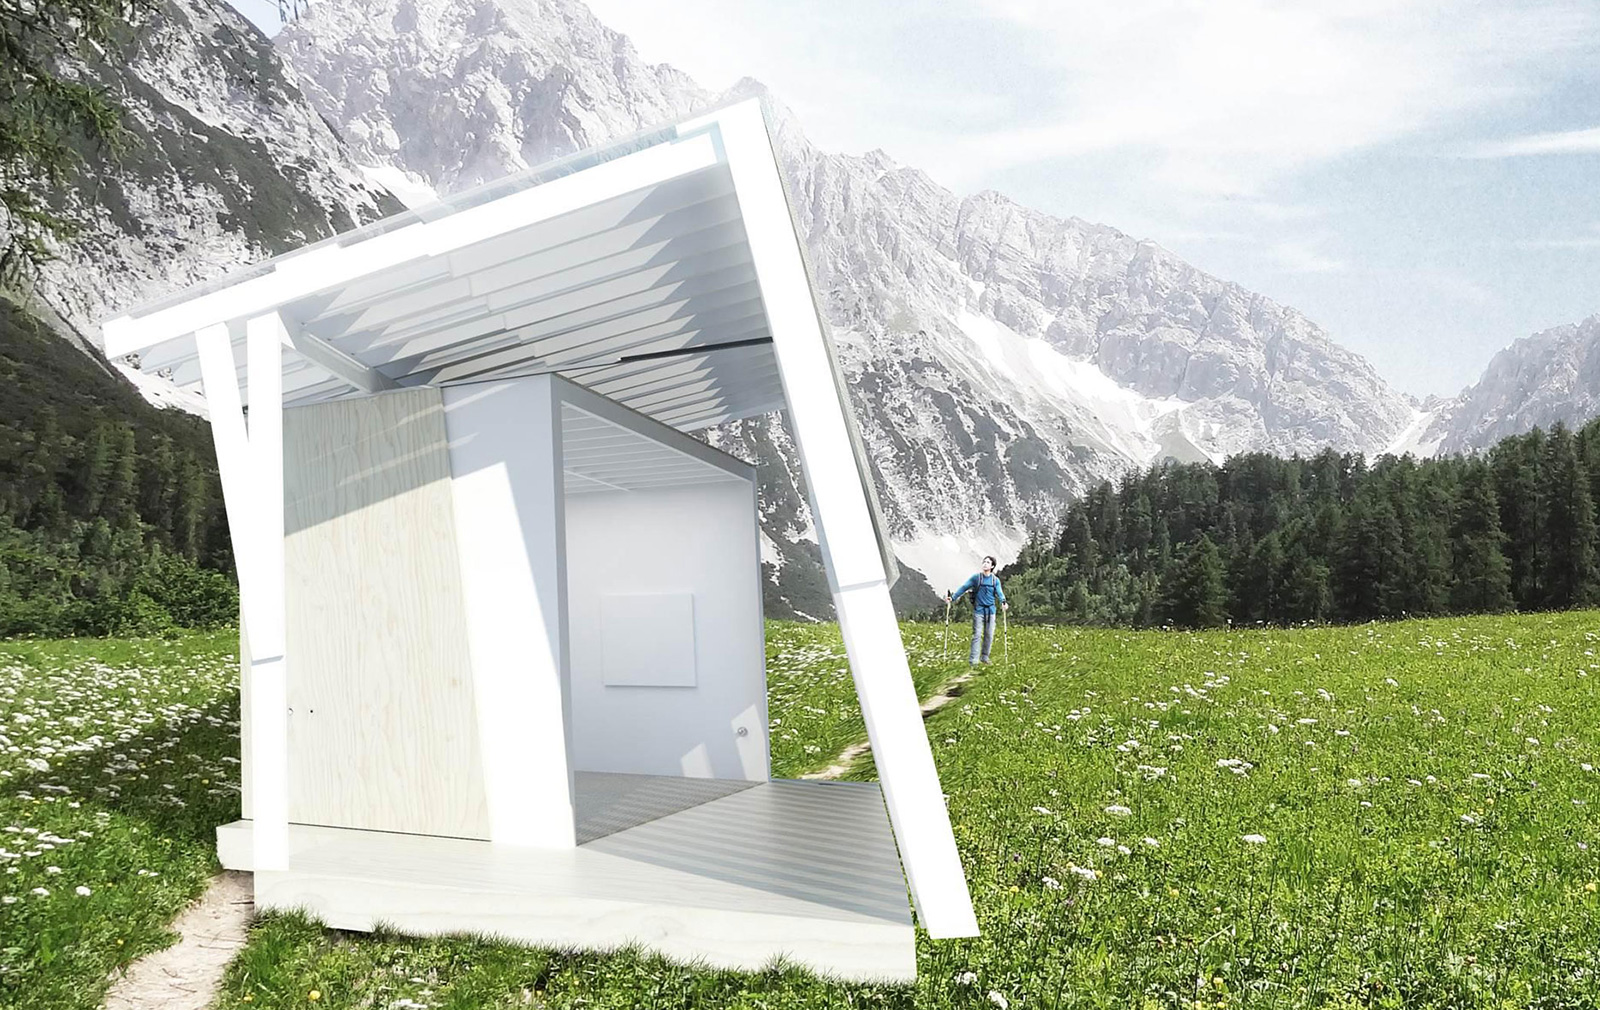 Model Art pavilion, by Gluckman Tang for Revolution Pre-Crafted Properties